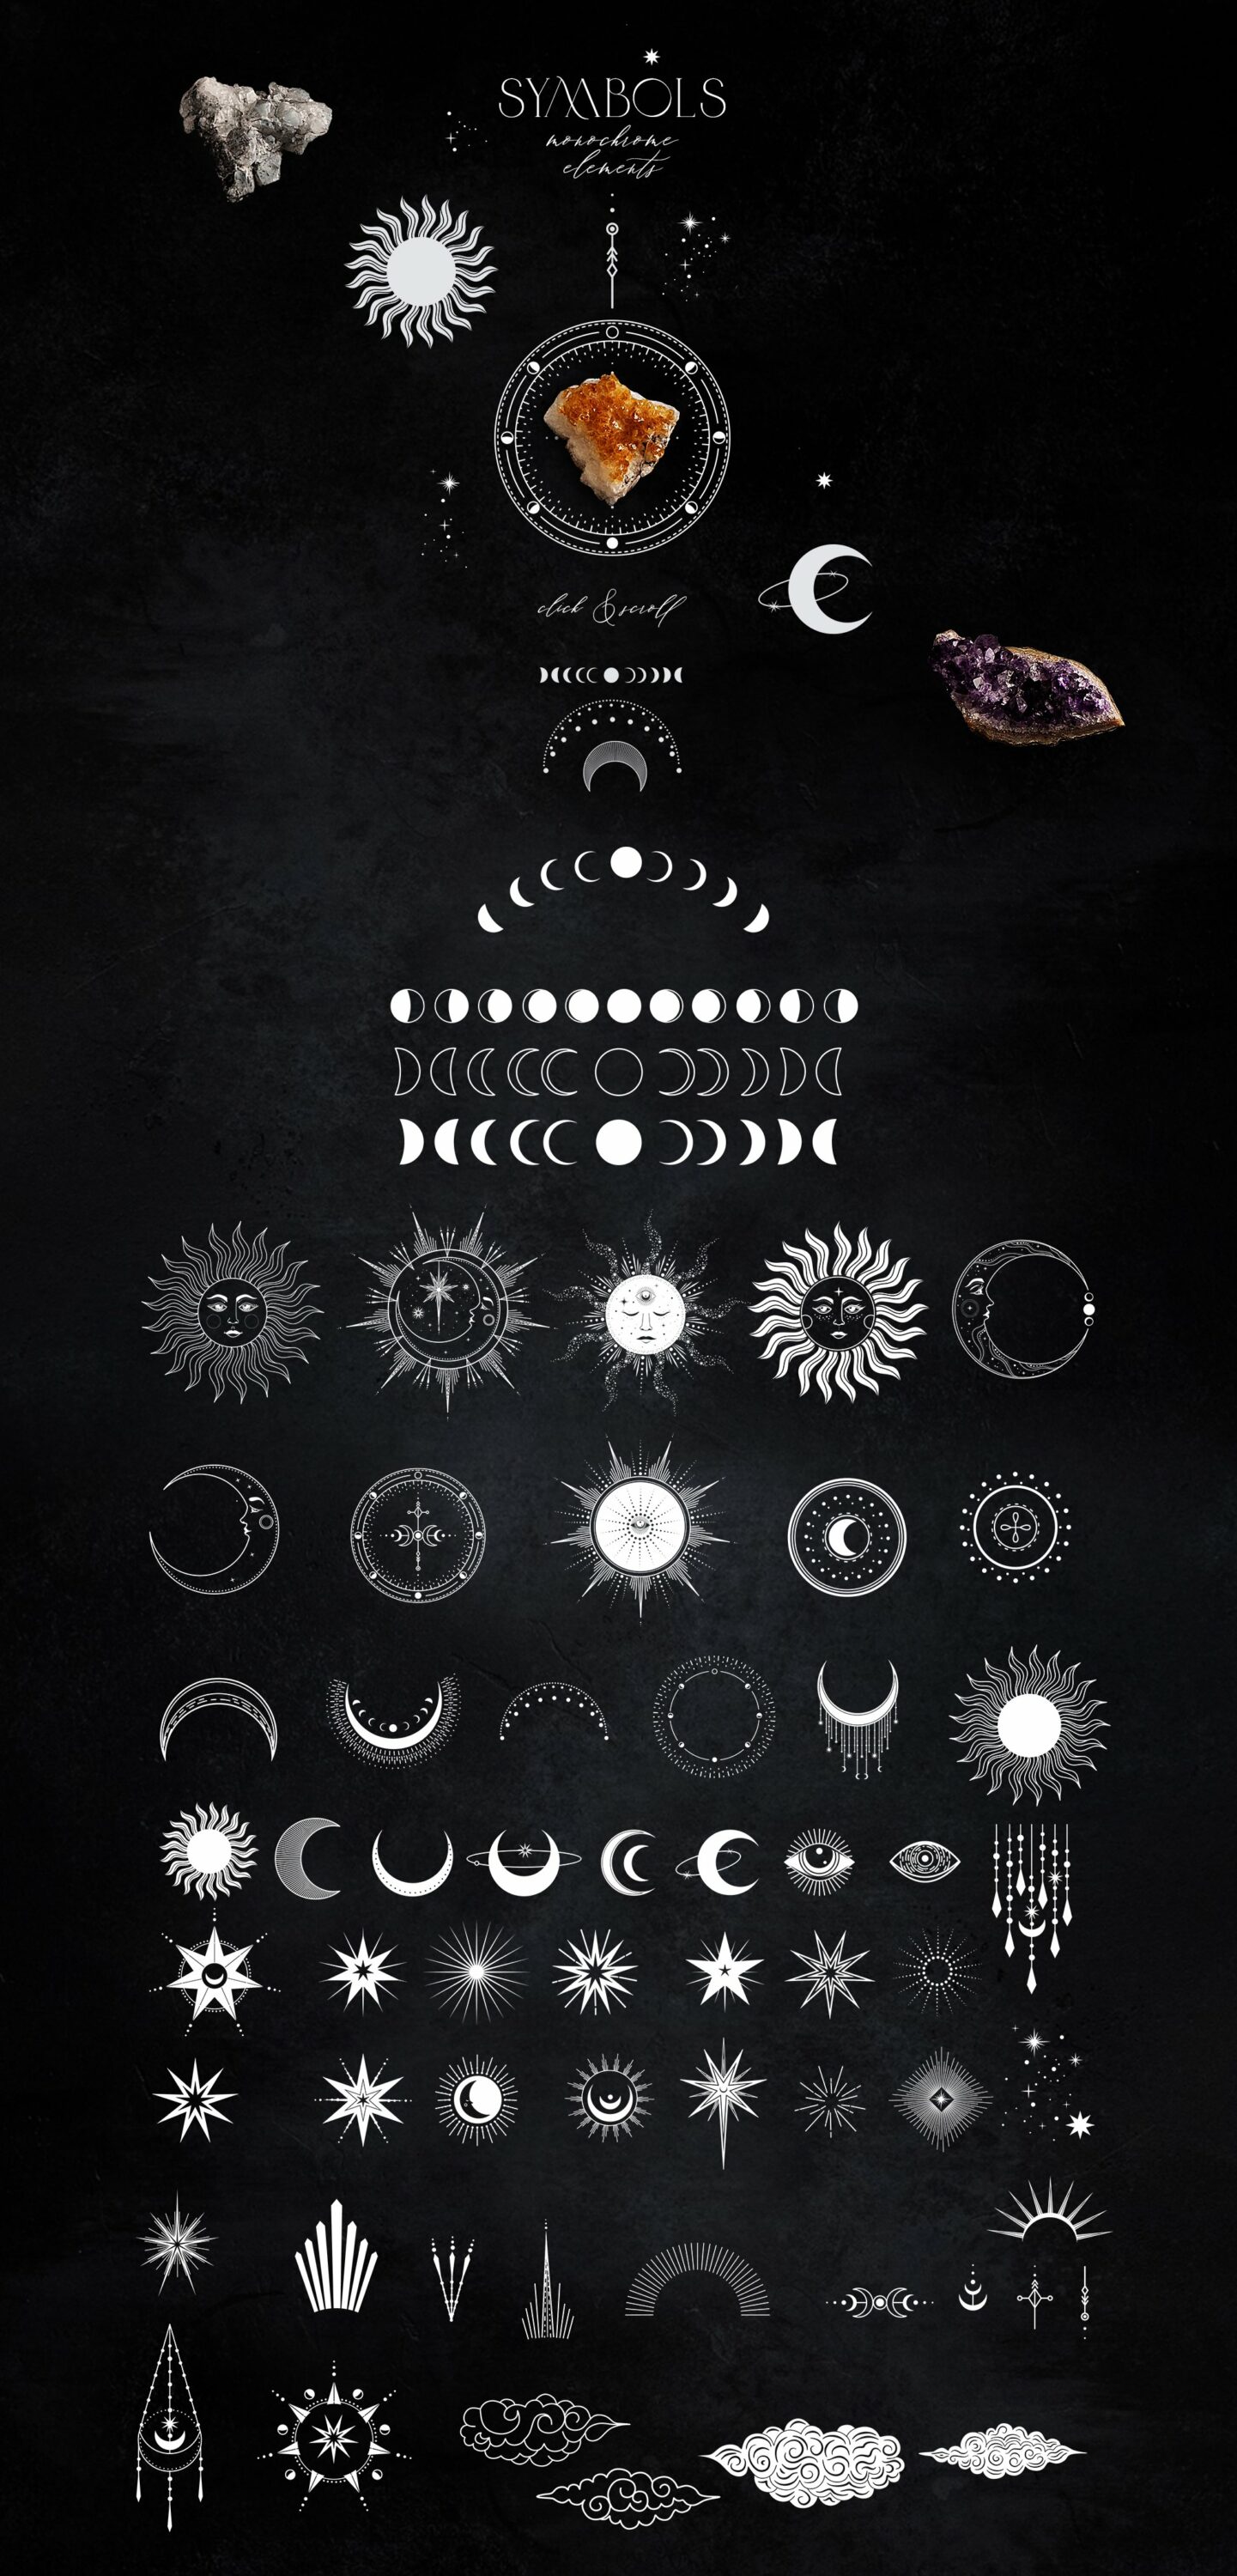 So beautiful and creative silver illustrations for your zodiac composition.